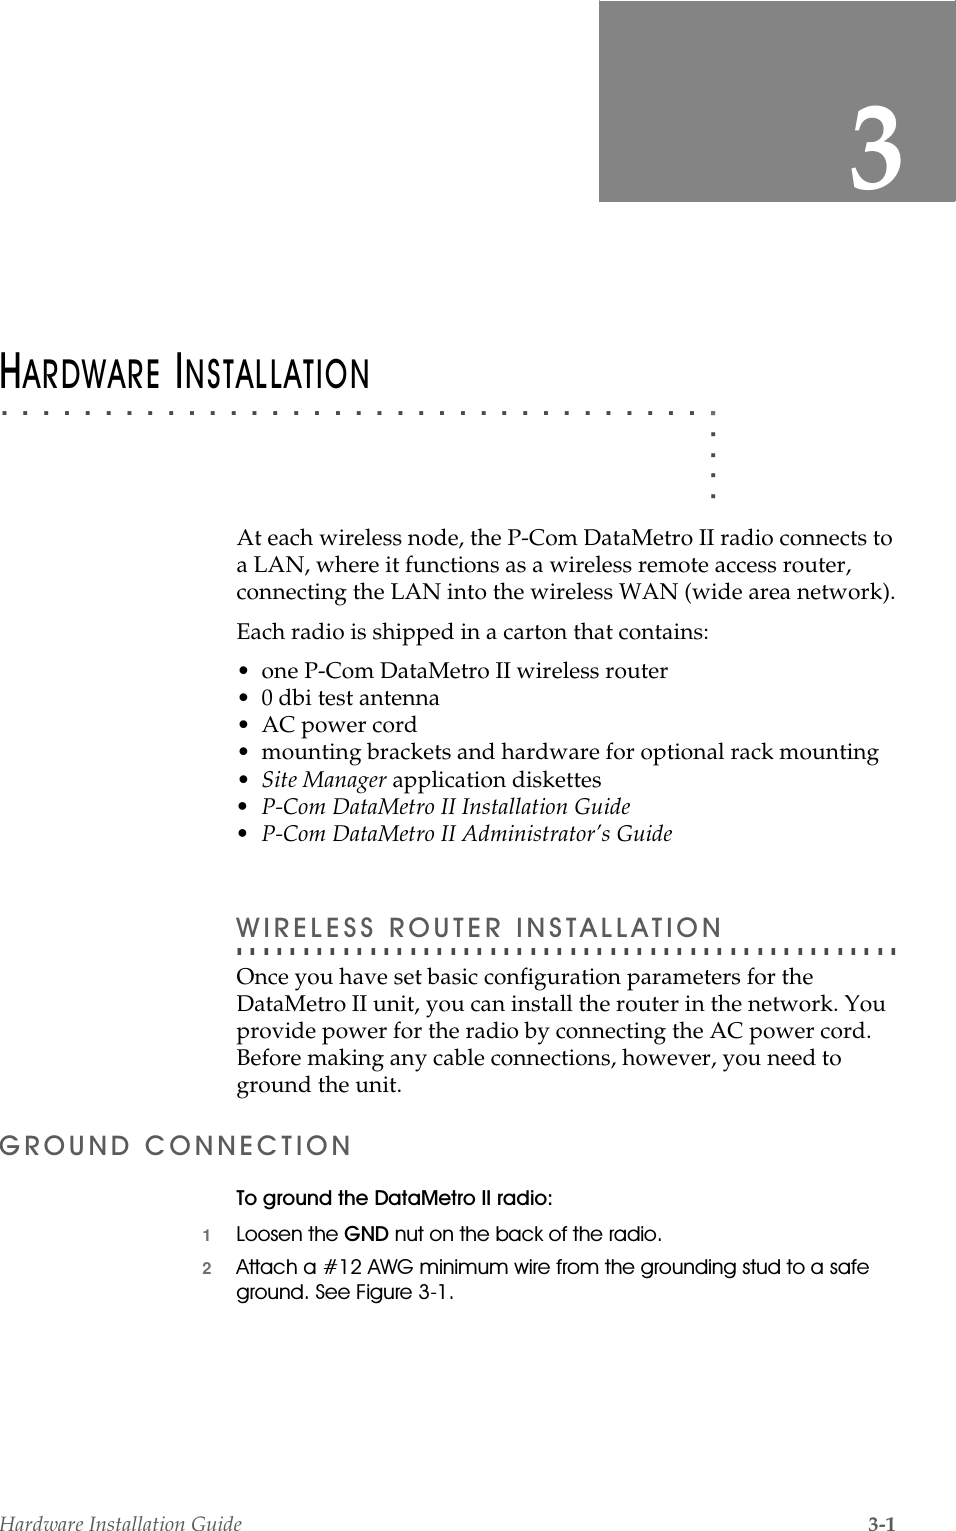 Hardware Installation Guide 3-13. . . . .. . . . . . . . . . . . . . . . . . . . . . . . . . . . . . . . . . .+$5&apos;:$5(,167$//$7,21At each wireless node, the P-Com DataMetro II radio connects to a LAN, where it functions as a wireless remote access router, connecting the LAN into the wireless WAN (wide area network).Each radio is shipped in a carton that contains:• one P-Com DataMetro II wireless router• 0 dbi test antenna• AC power cord• mounting brackets and hardware for optional rack mounting•Site Manager application diskettes• P-Com DataMetro II Installation Guide• P-Com DataMetro II Administrator’s Guide. . . . . . . . . . . . . . . . . . . . . . . . . . . . . . . . . . . . . . . . . . . . . . . . . . :,5(/(665287(5,167$//$7,21Once you have set basic configuration parameters for the DataMetro II unit, you can install the router in the network. You provide power for the radio by connecting the AC power cord. Before making any cable connections, however, you need to ground the unit.*5281&apos;&amp;211(&amp;7,217RJURXQGWKH&apos;DWD0HWUR,,UDGLR1/RRVHQWKH*1&apos;QXWRQWKHEDFNRIWKHUDGLR2$WWDFKD$:*PLQLPXPZLUHIURPWKHJURXQGLQJVWXGWRDVDIHJURXQG6HH)LJXUH 